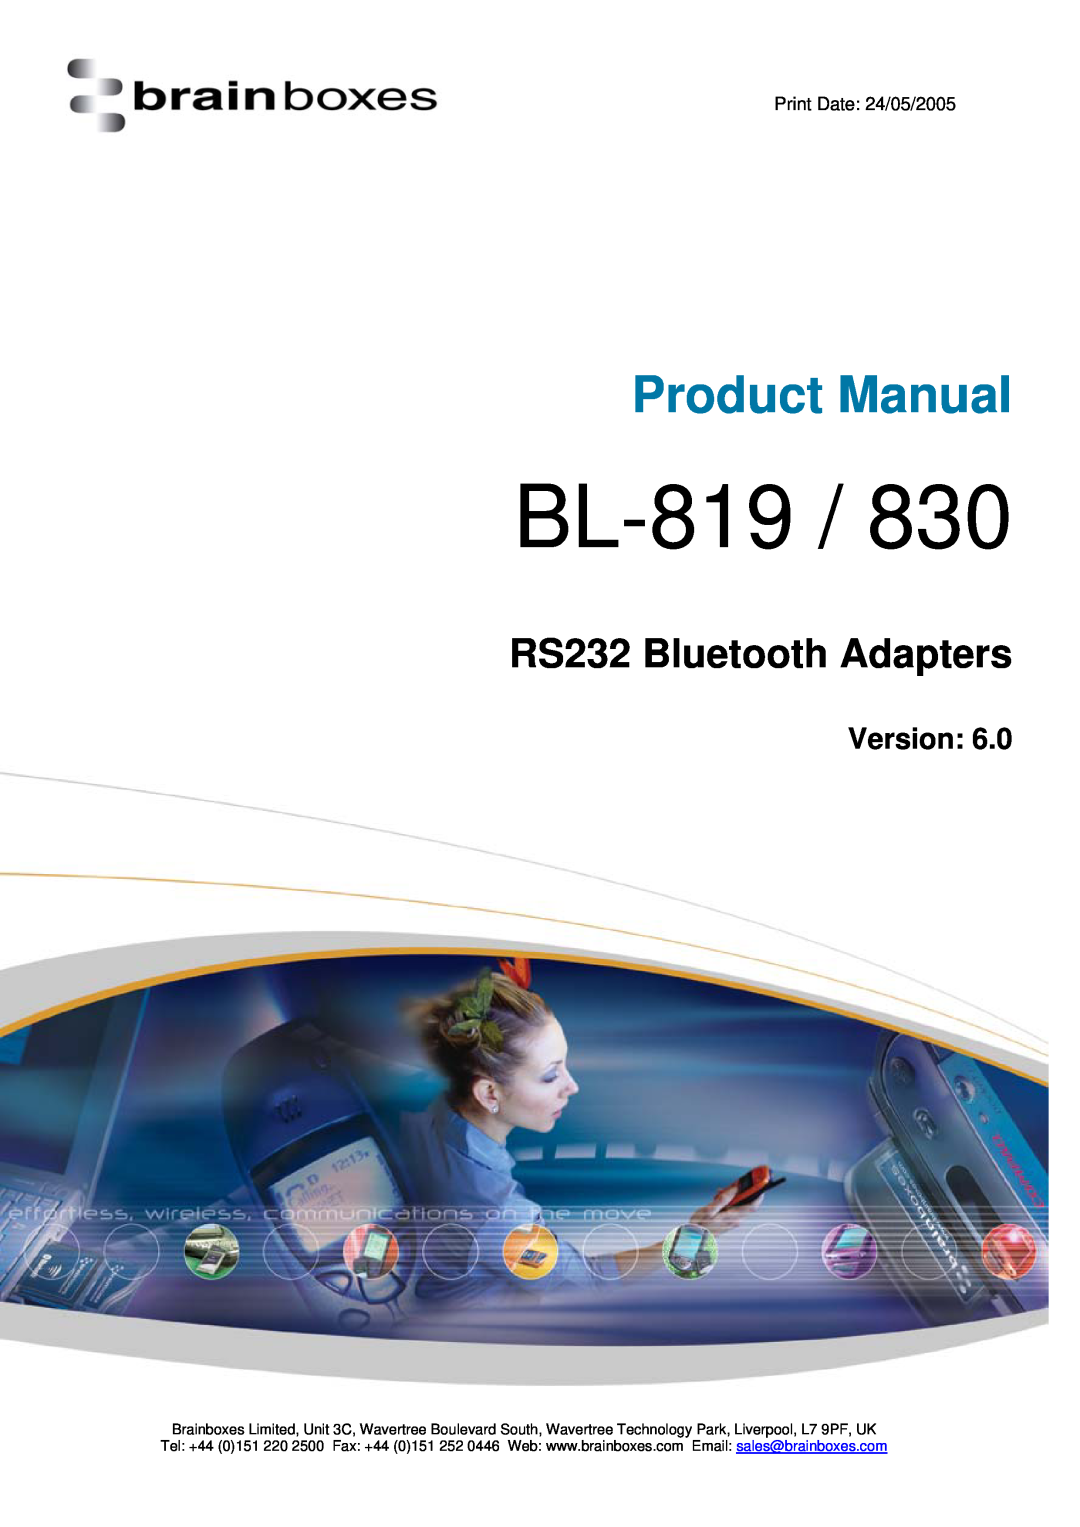 Brainboxes BL-819, BL-830 manual Version, Product Manual, RS232 Bluetooth Adapters 